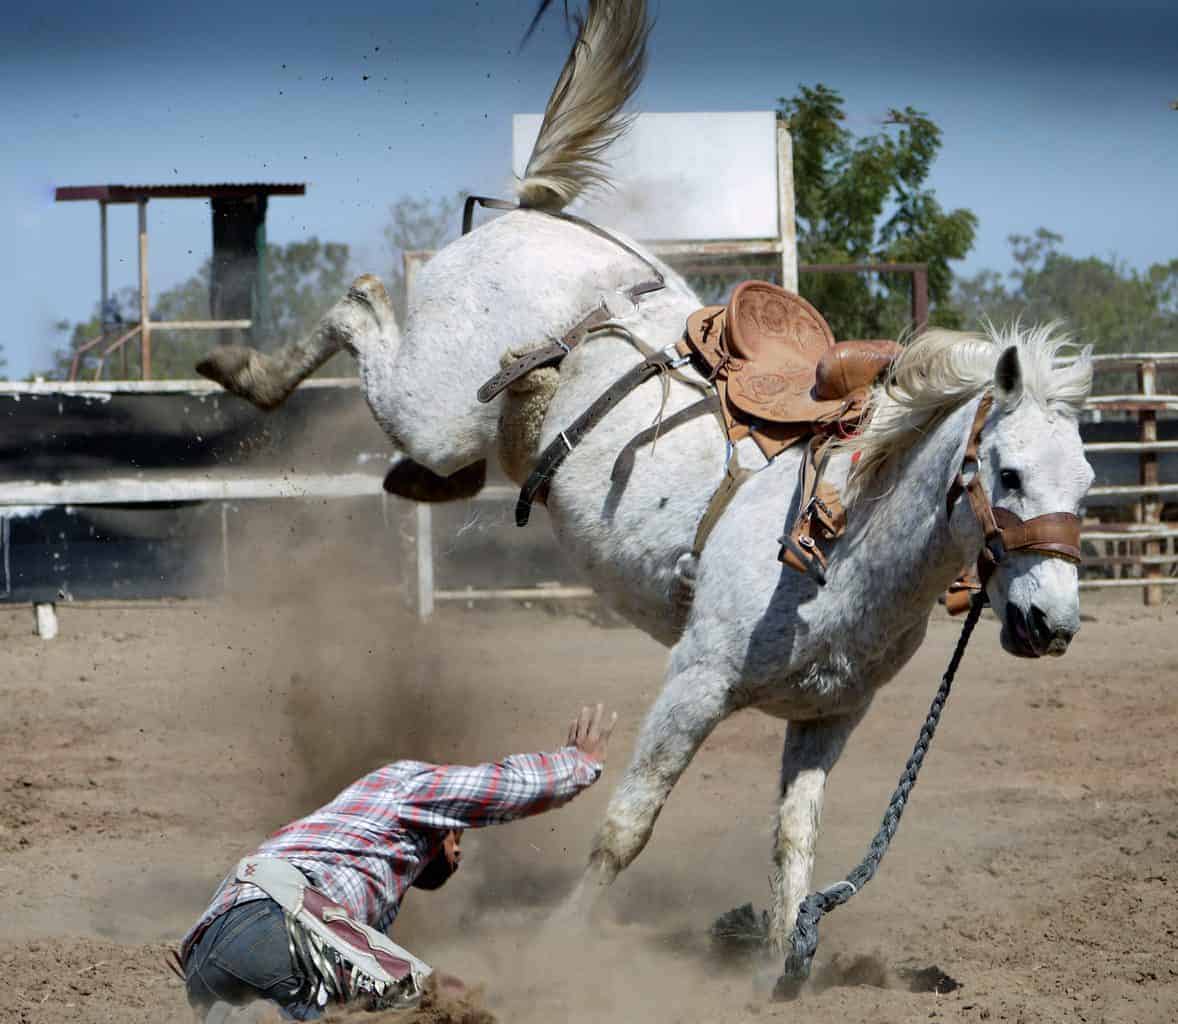 A horseback rider falling from his horse